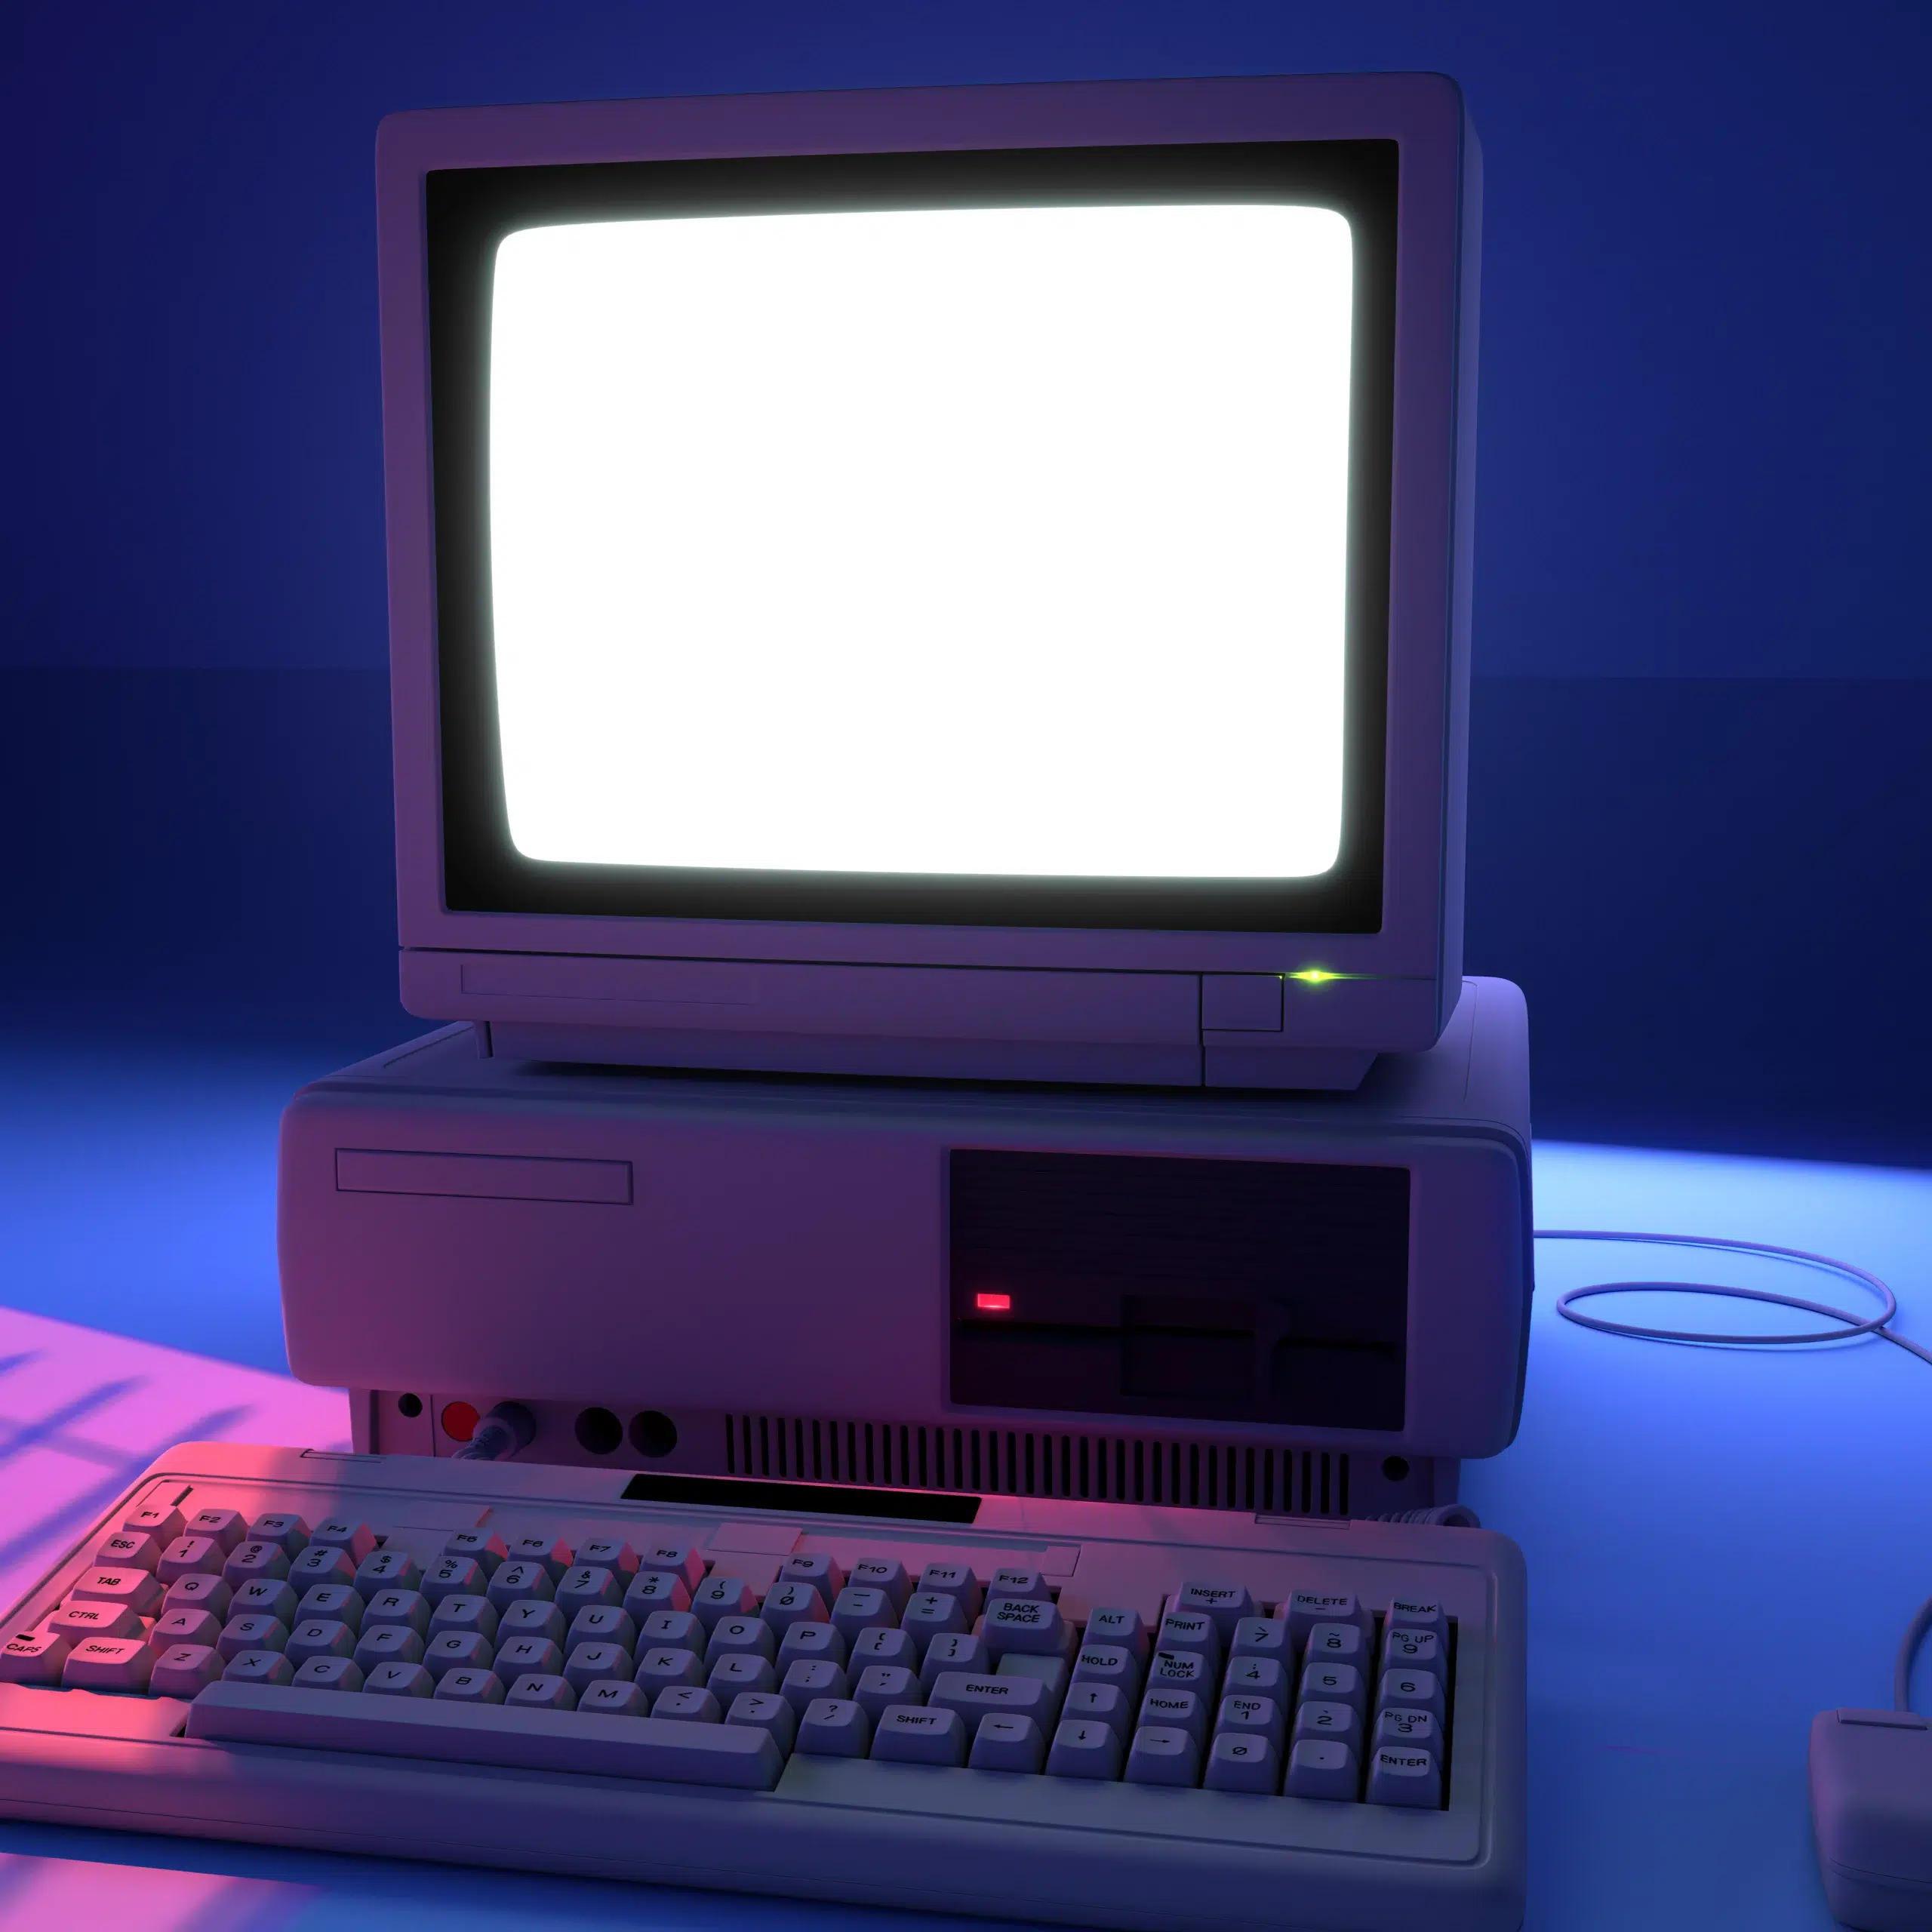 Retro PC with Glowing Blank Screen in Neon Lighting Close-Up. 3D Rendering.